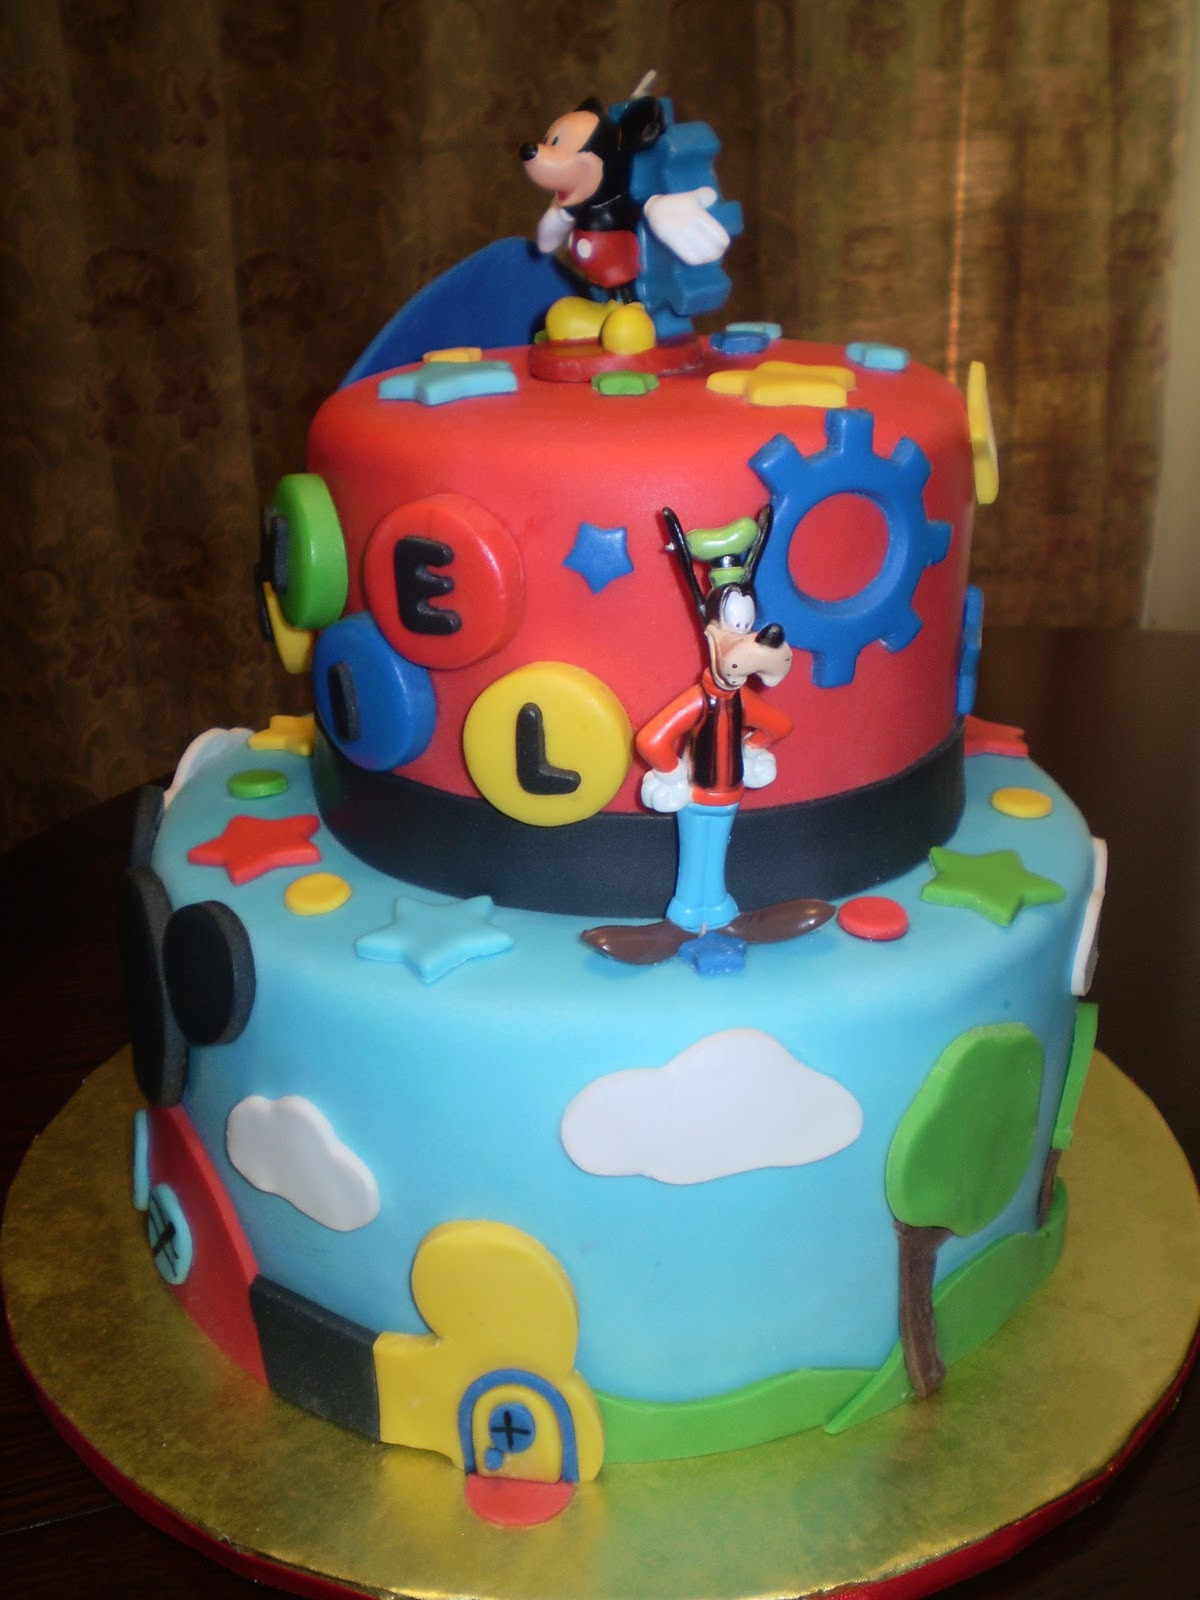 Mickey Mouse Birthday Cakes
 Divine Cakes by Janice Mickey Mouse Club Birthday Cake